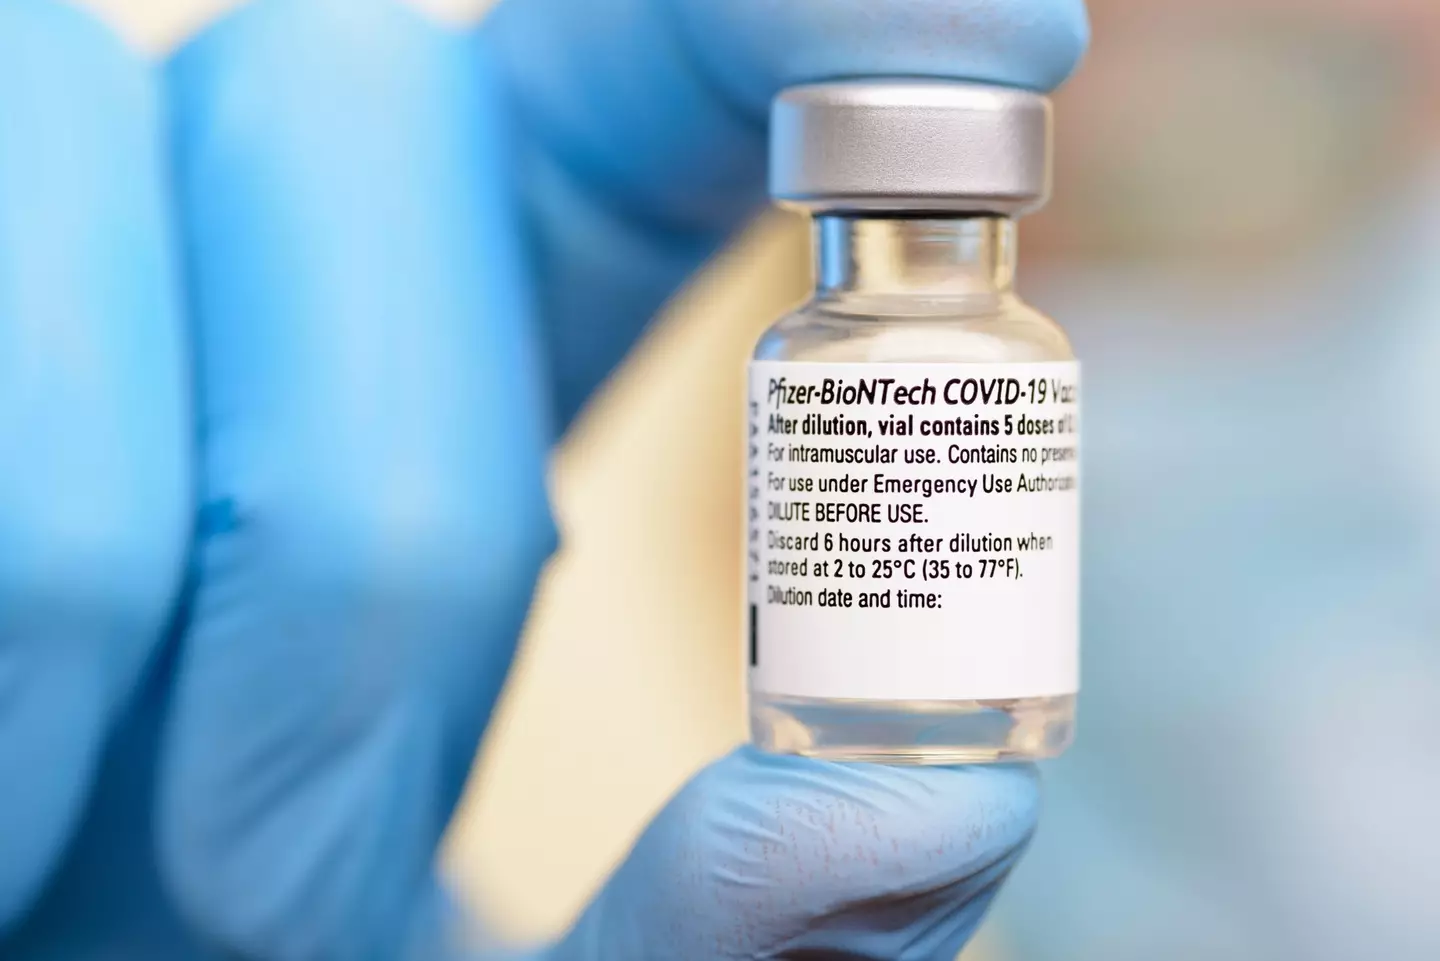 A fourth Covid vaccine will be needed according to Pfizer's CEO.